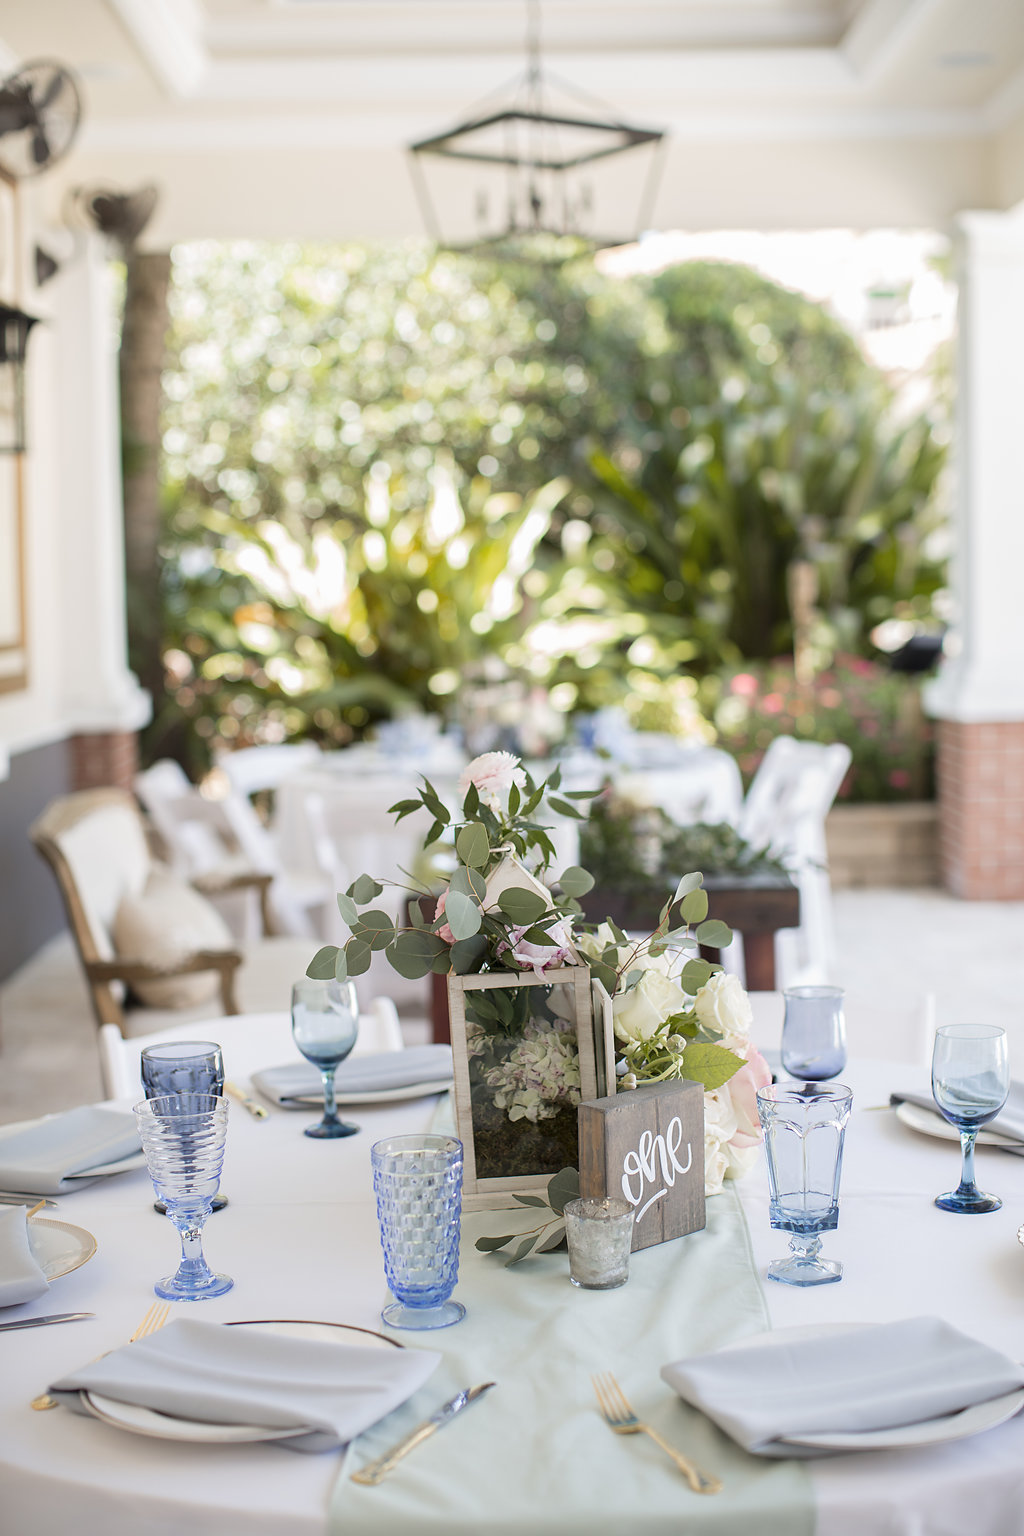 Romantic Vintage Outdoor Wedding Reception Decor | Mismatched Glassware and Wood Block Table Numbers and Greenery Centerpieces | Sarasota Reserve Vintage Rentals